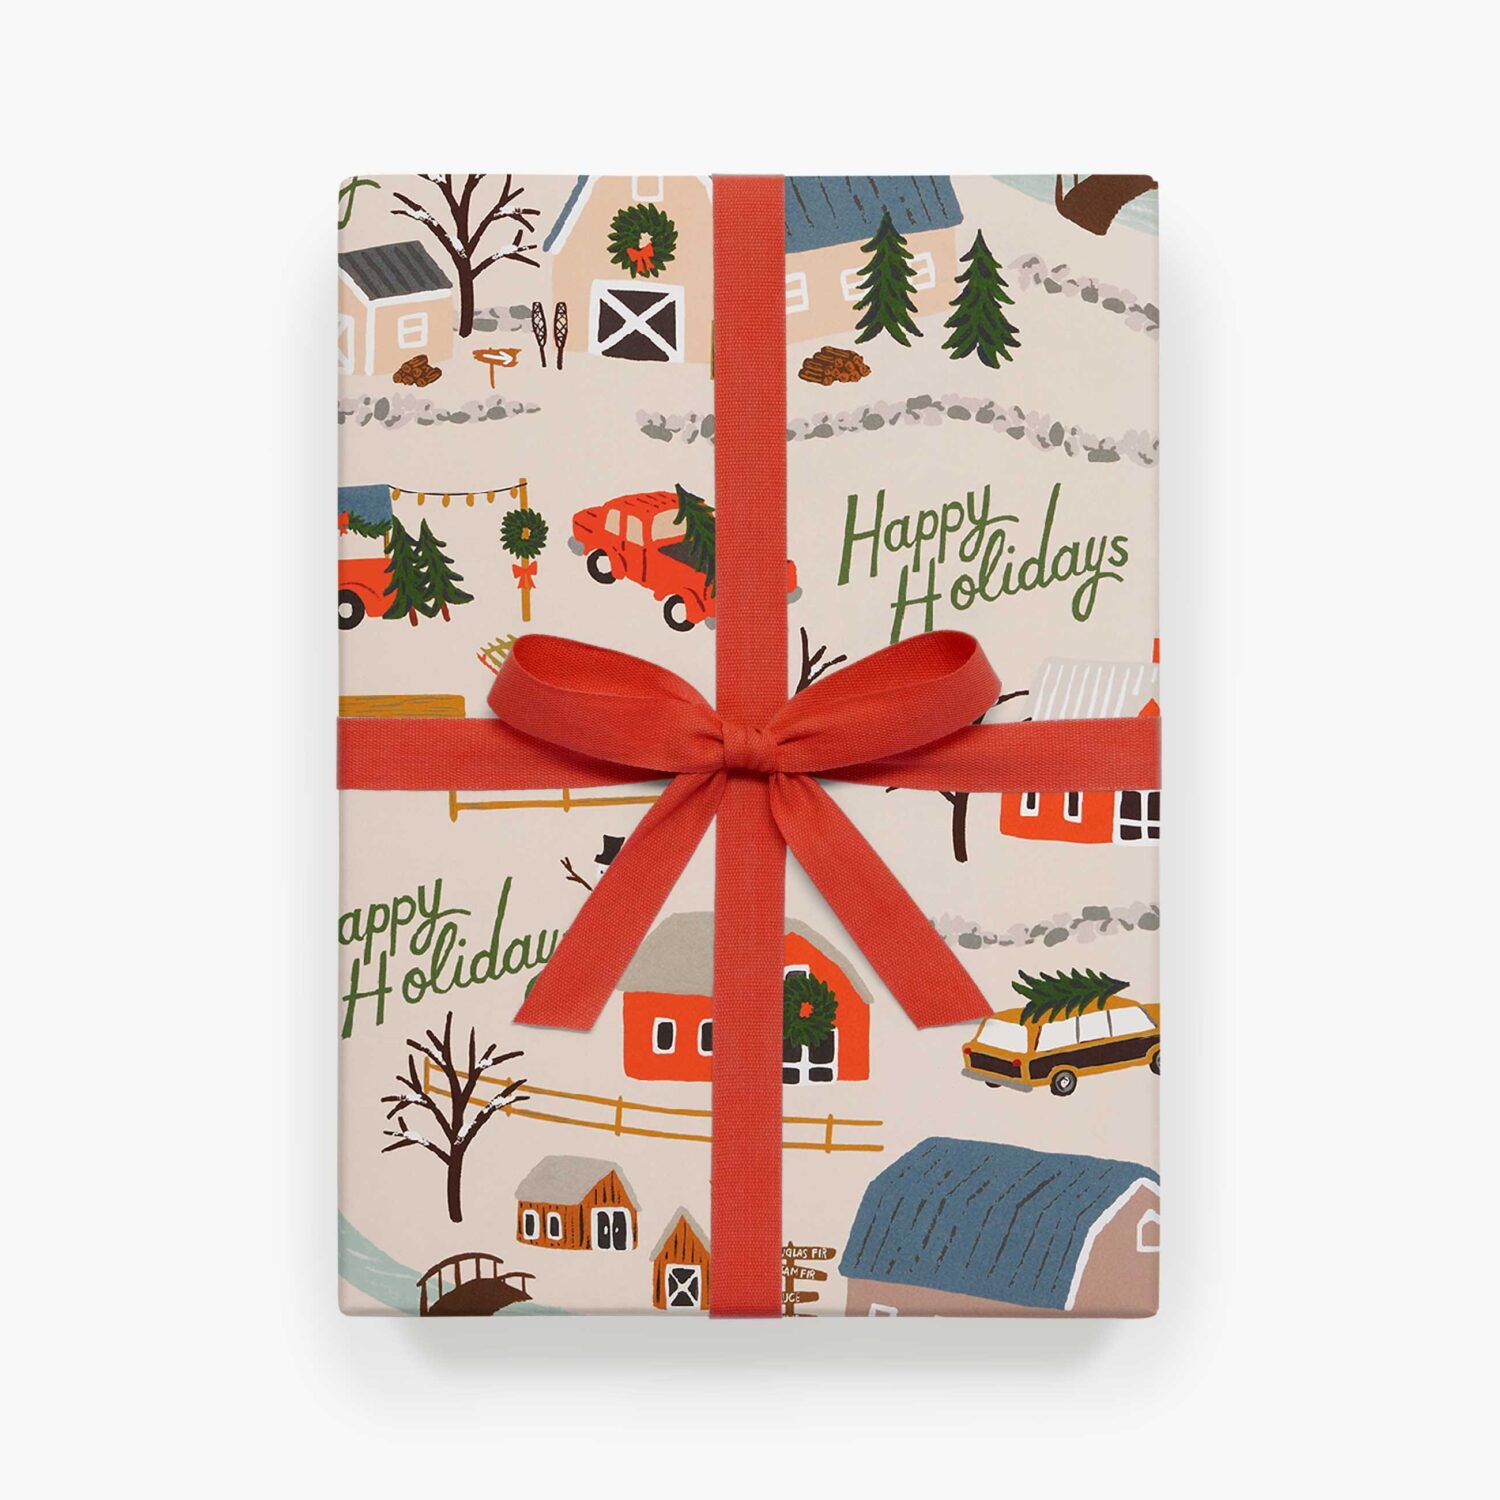 Rifle Paper Co. "Holiday Tree Farm" Wrapping Paper Sheet